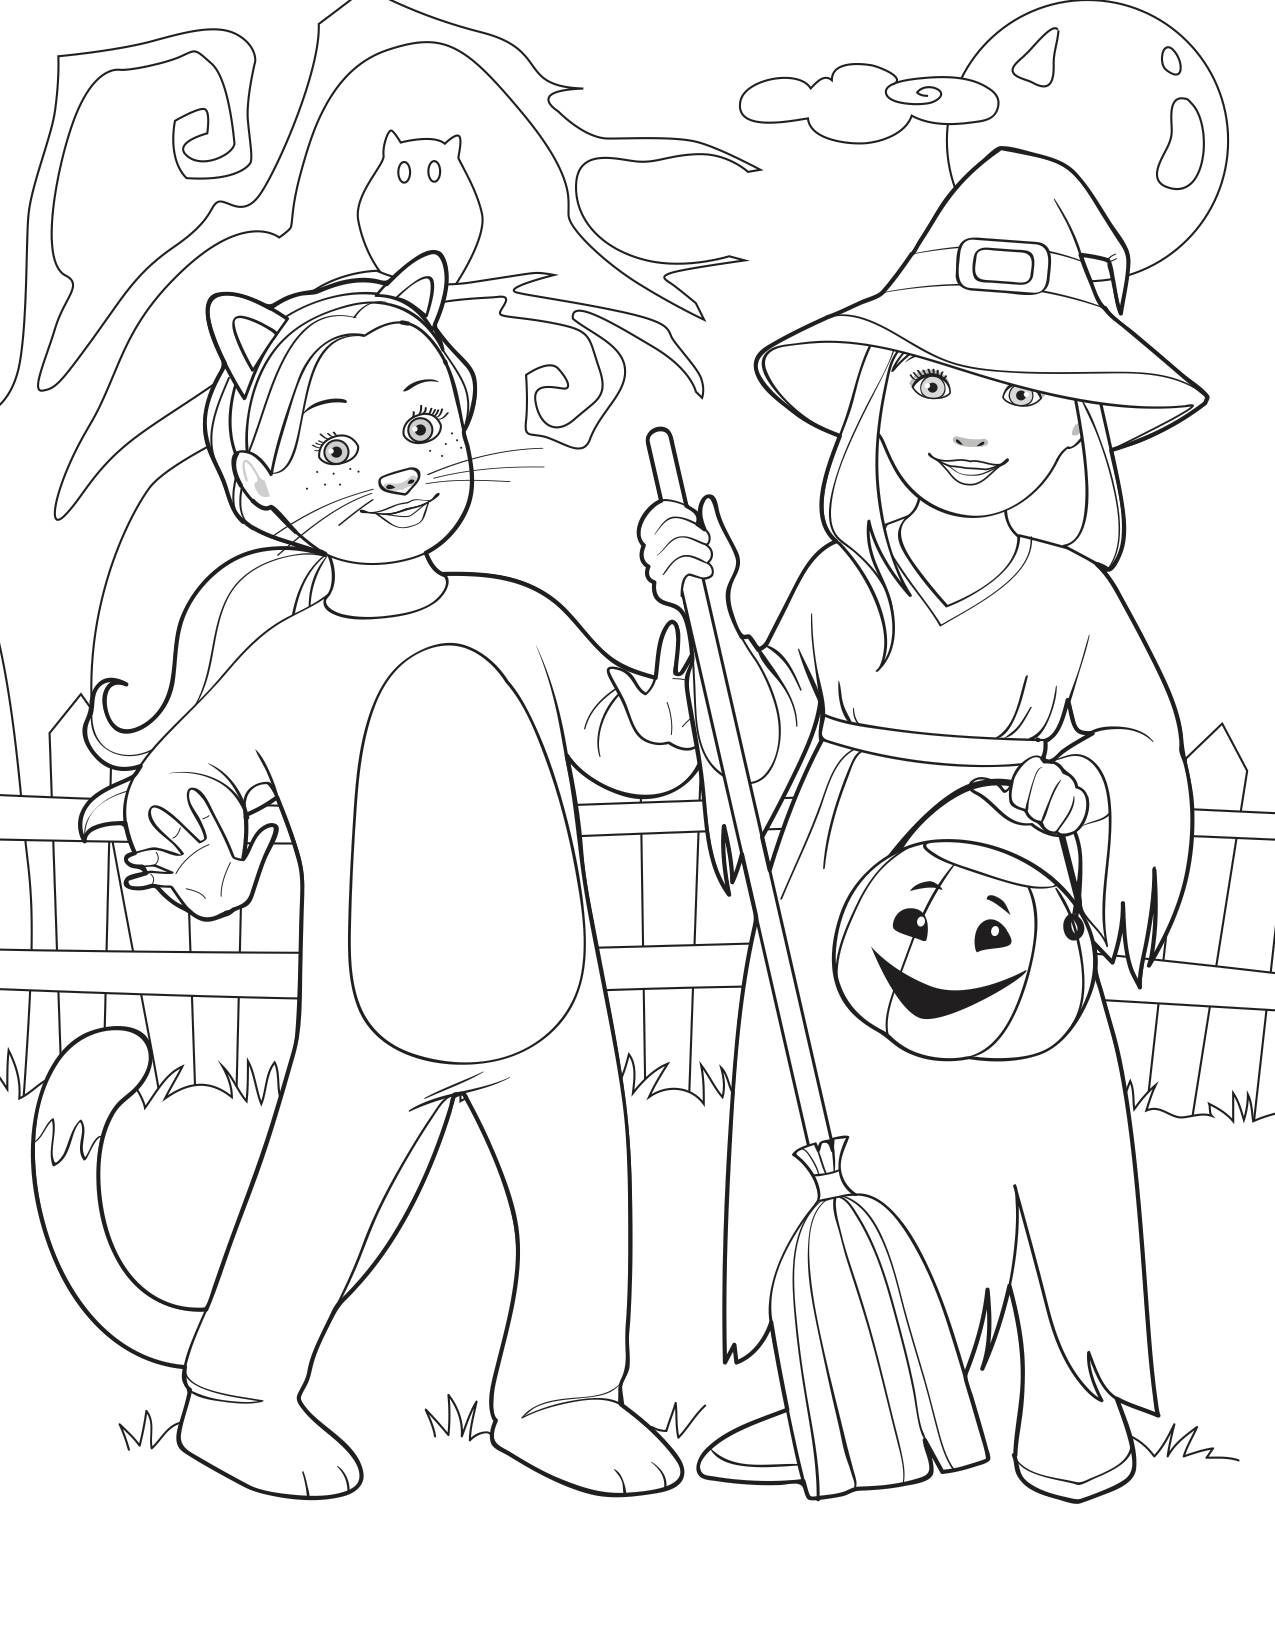 https://ourgeneration.com/wp-content/uploads/OurGeneration_ColoringSheet_Halloween.jpg